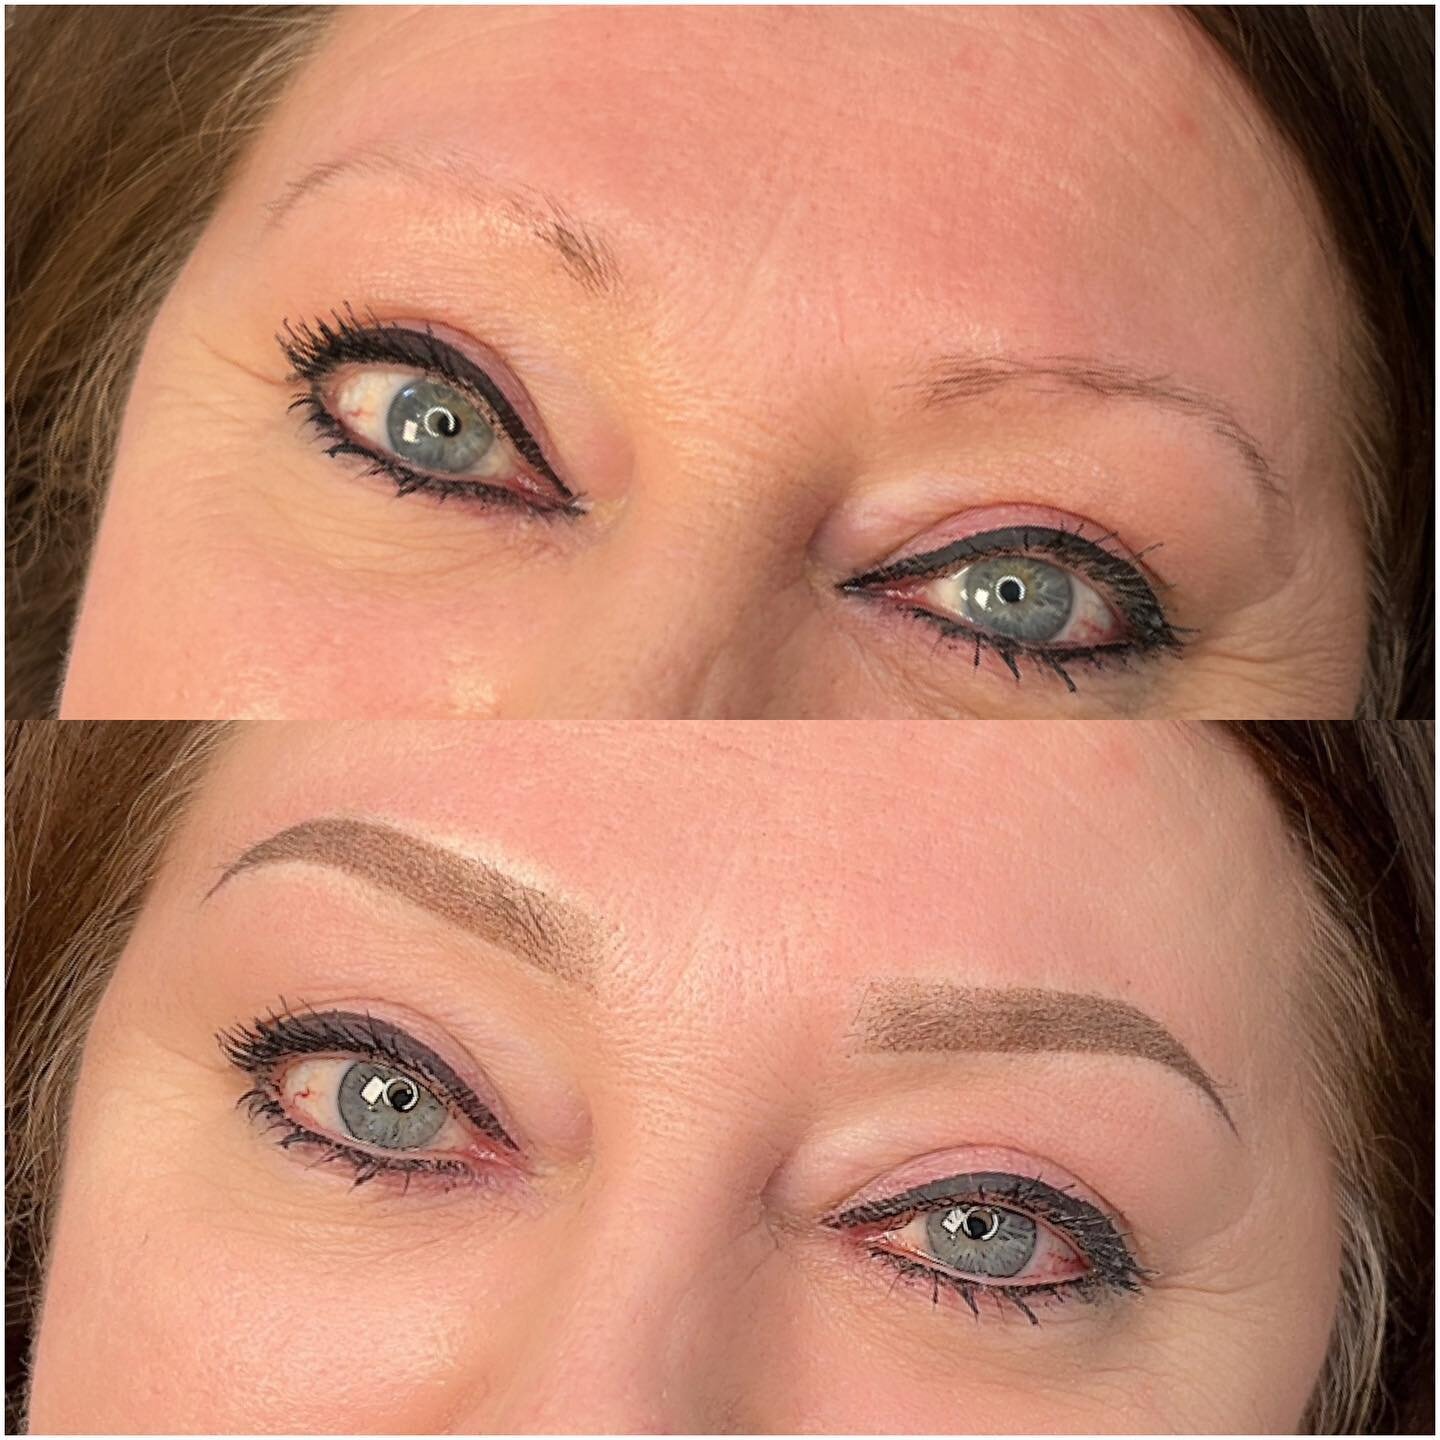 Soft ombr&eacute; is the best for super thin brows ! This will heal softer making it look like she has lightly filled it in with a bit of powder. 

❤️❤️❤️❤️❤️❤️❤️❤️